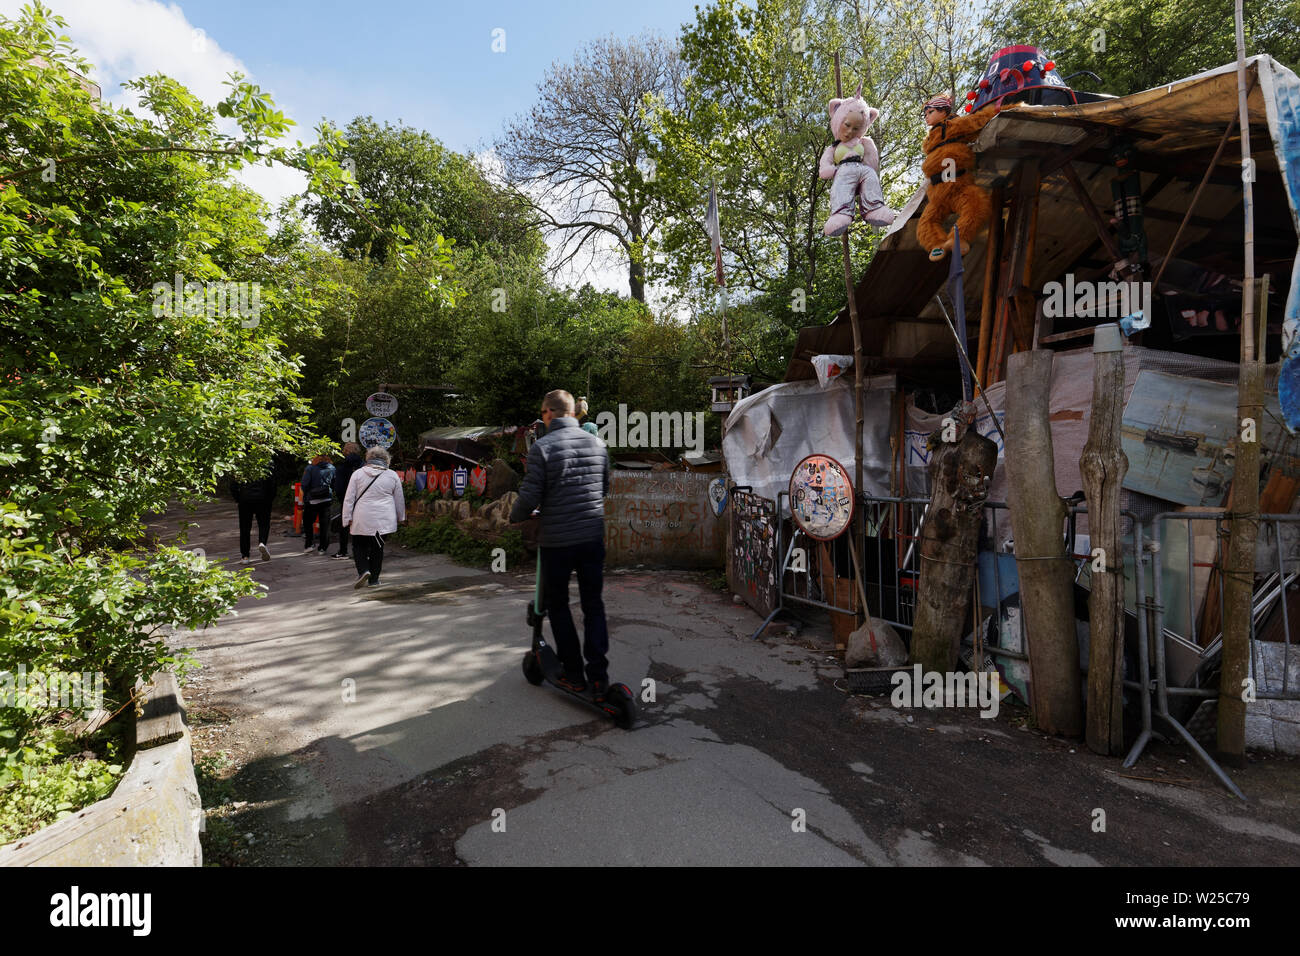 People walking in Freetown Christiania, an intentional community in the borough of Christianshavn in Copenhagen, Denmark Stock Photo